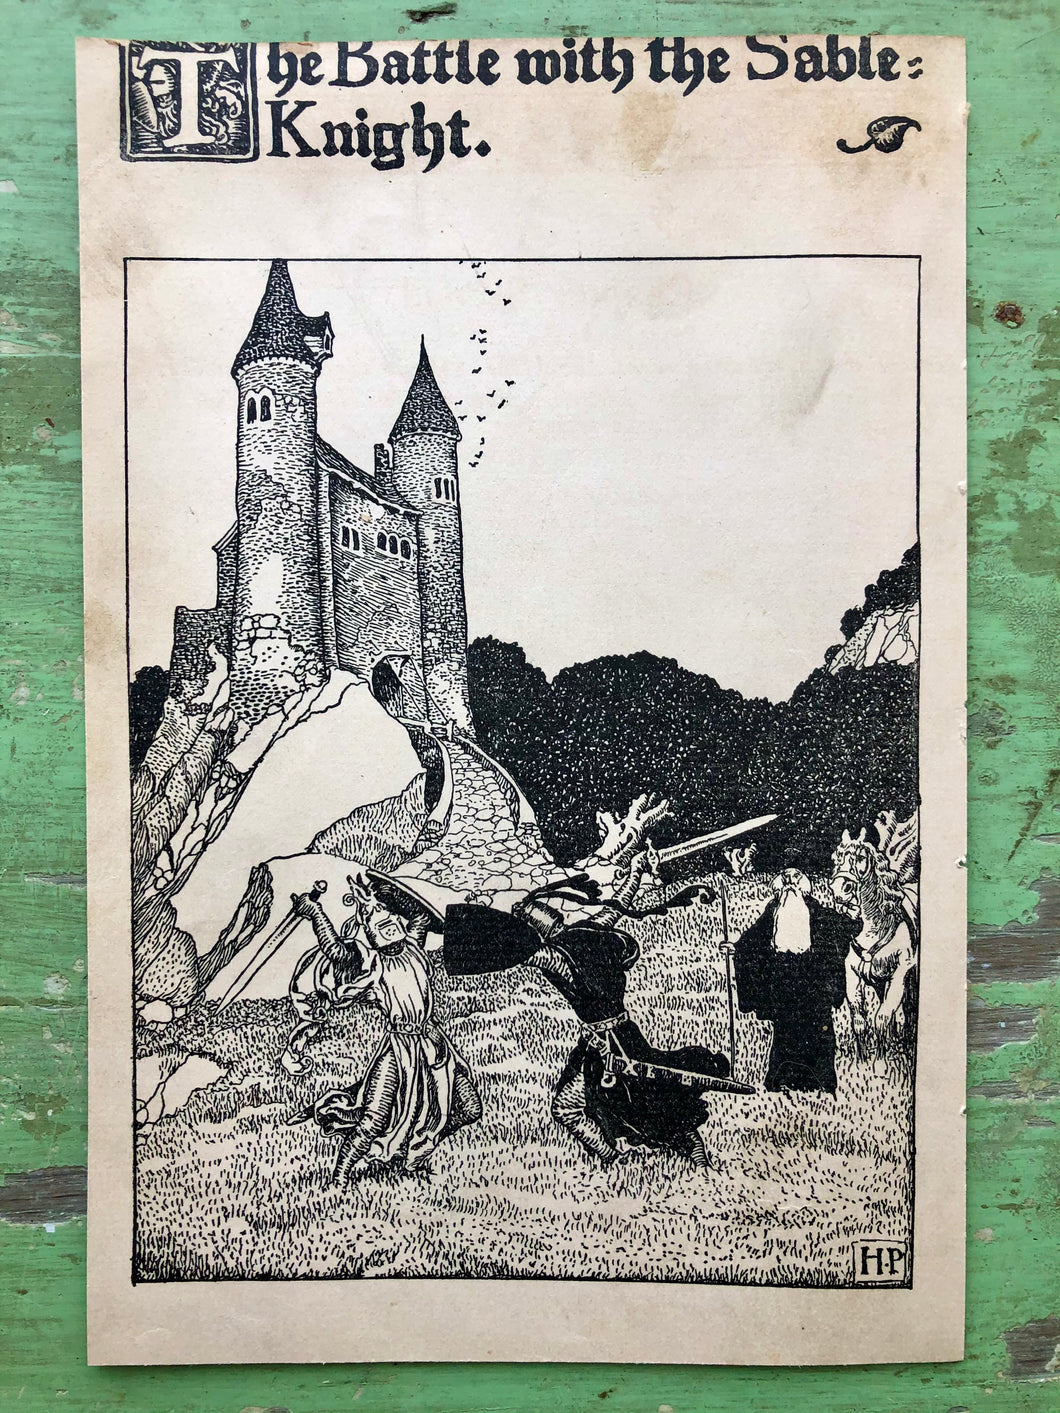 Print from “The Story of King Arthur and His Knights” by Howard Pyle